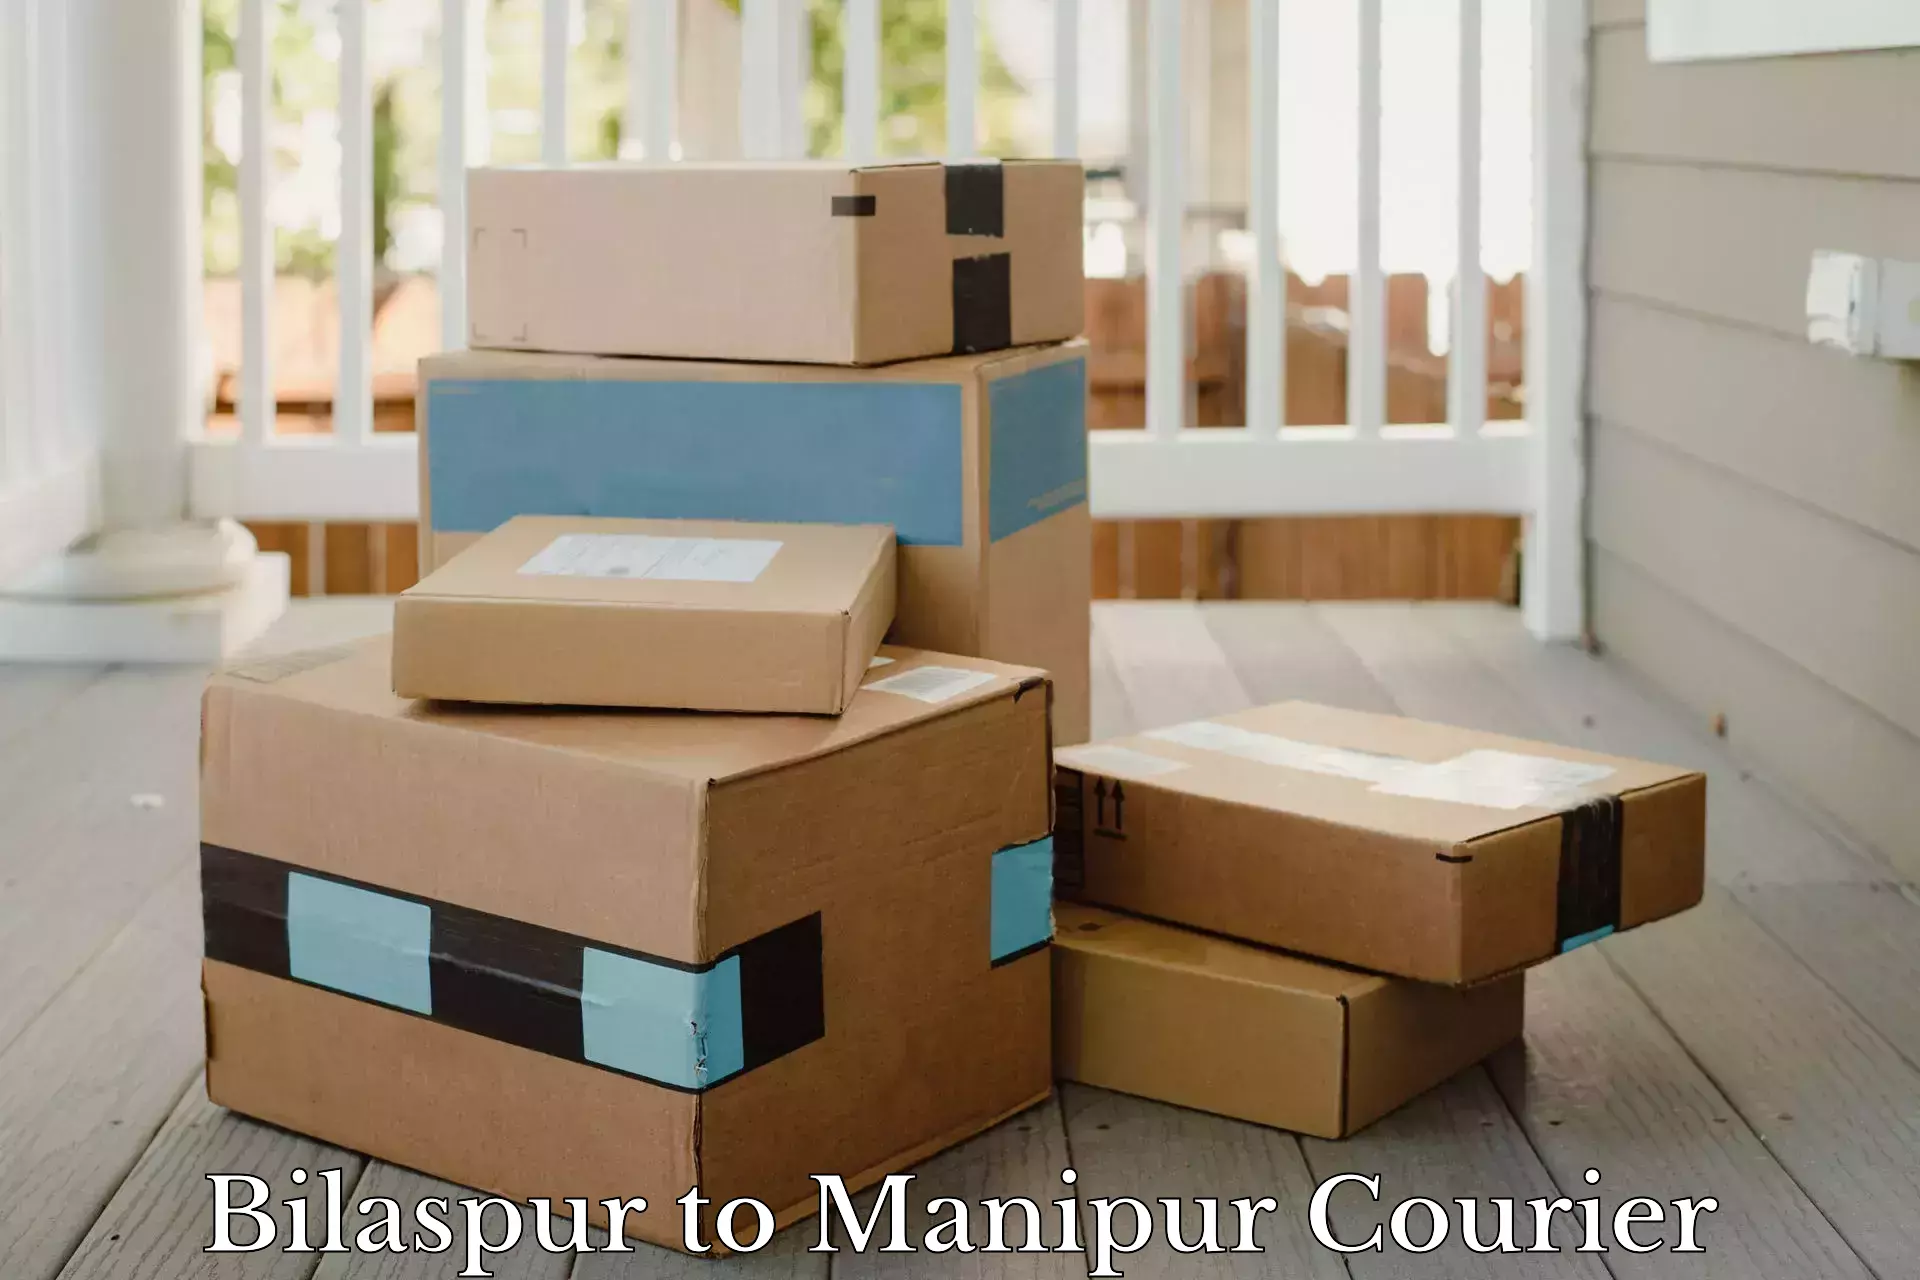 Online package tracking Bilaspur to Moirang